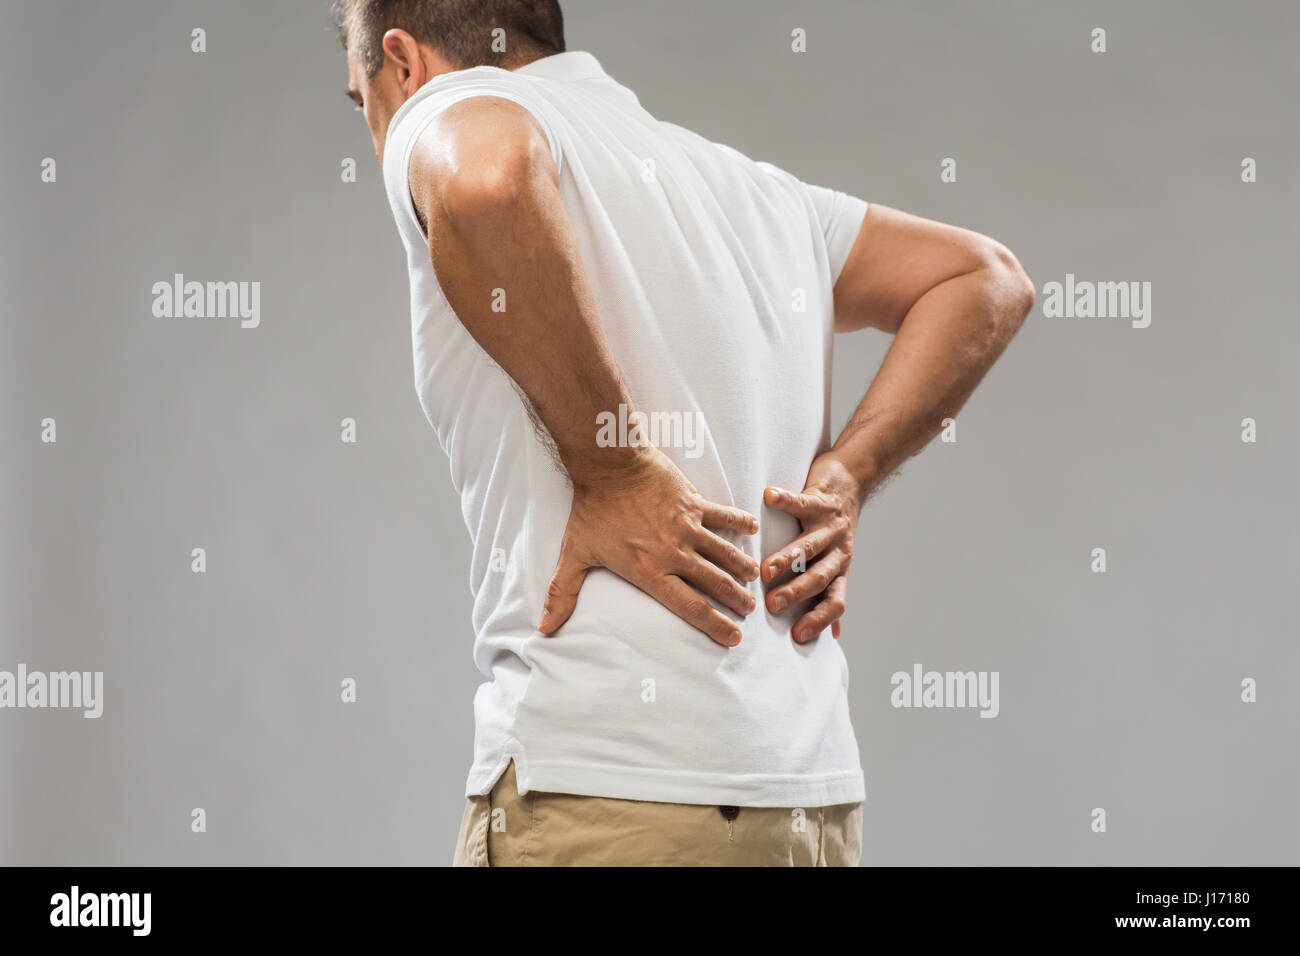 close up of man suffering from backache Stock Photo